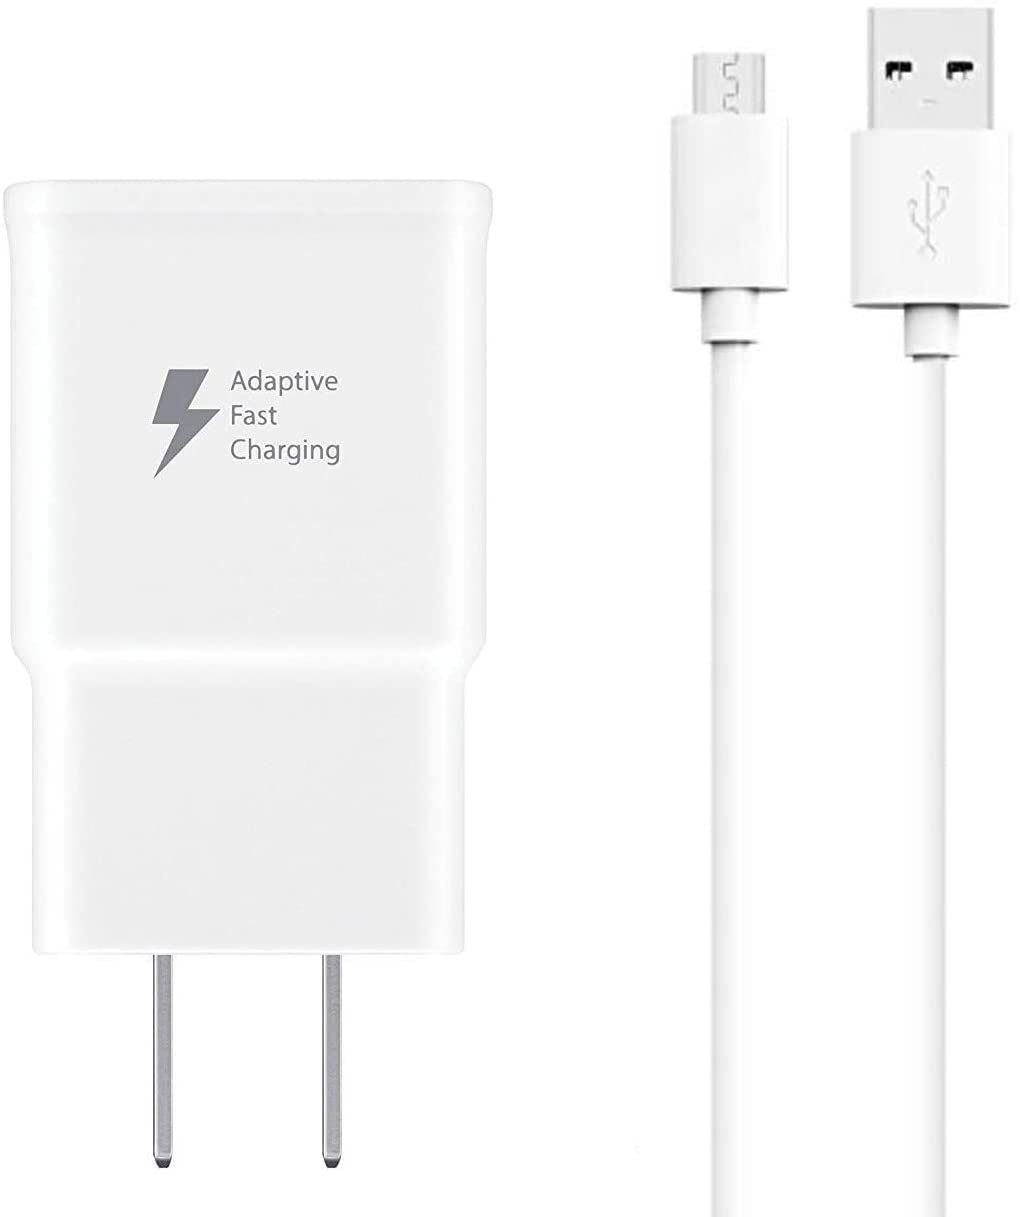 Mua Galaxy S7 Adaptive Fast Charging Wall Charger Kit Set with Micro   USB Cable, Compatible with Samsung Galaxy S7/Edge/S6/Note5/4/S3 (White)  trên Amazon Mỹ chính hãng 2023 | Giaonhan247